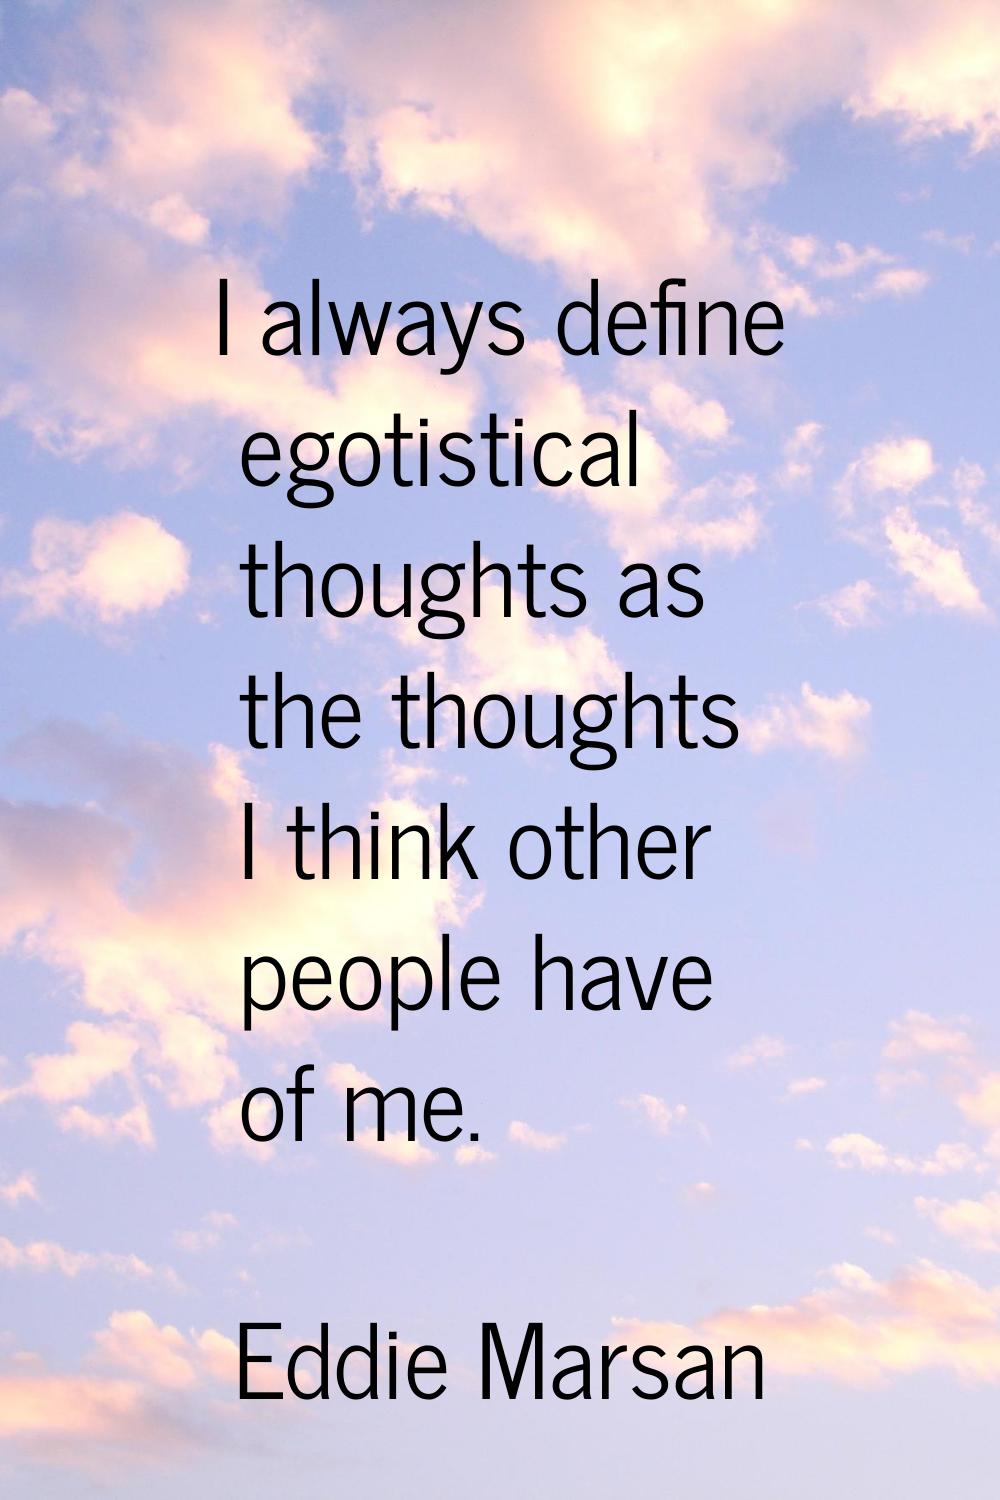 I always define egotistical thoughts as the thoughts I think other people have of me.